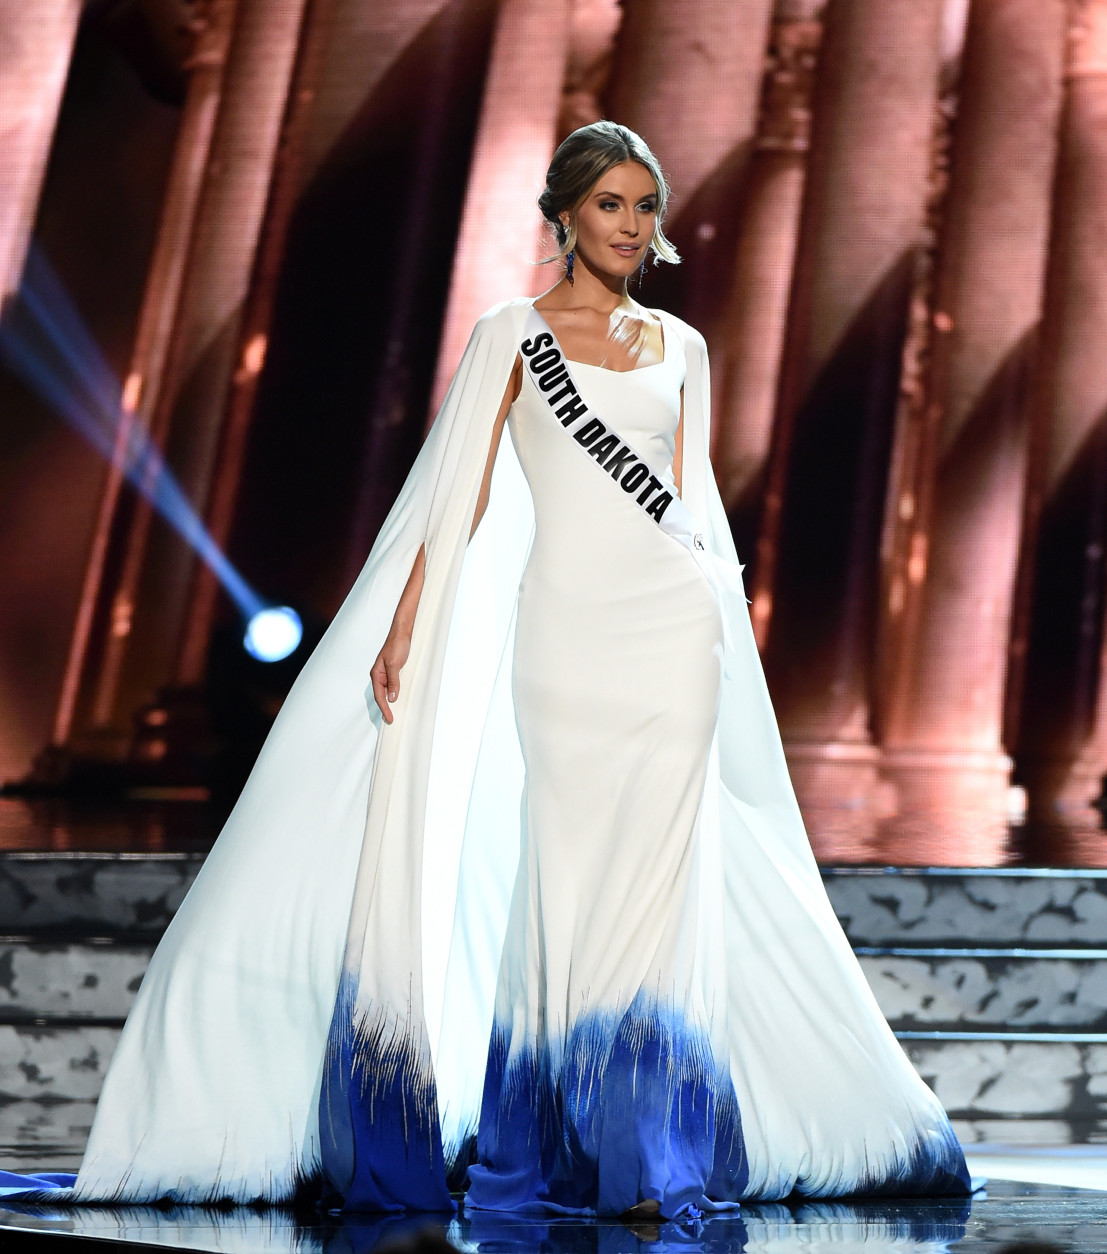 LAS VEGAS, NV - JUNE 01:  Miss South Dakota USA Madison McKeown competes in the evening gown competition during the 2016 Miss USA pageant preliminary competition at T-Mobile Arena on June 1, 2016 in Las Vegas, Nevada. The 2016 Miss USA will be crowned on June 5 in Las Vegas.  (Photo by Ethan Miller/Getty Images)